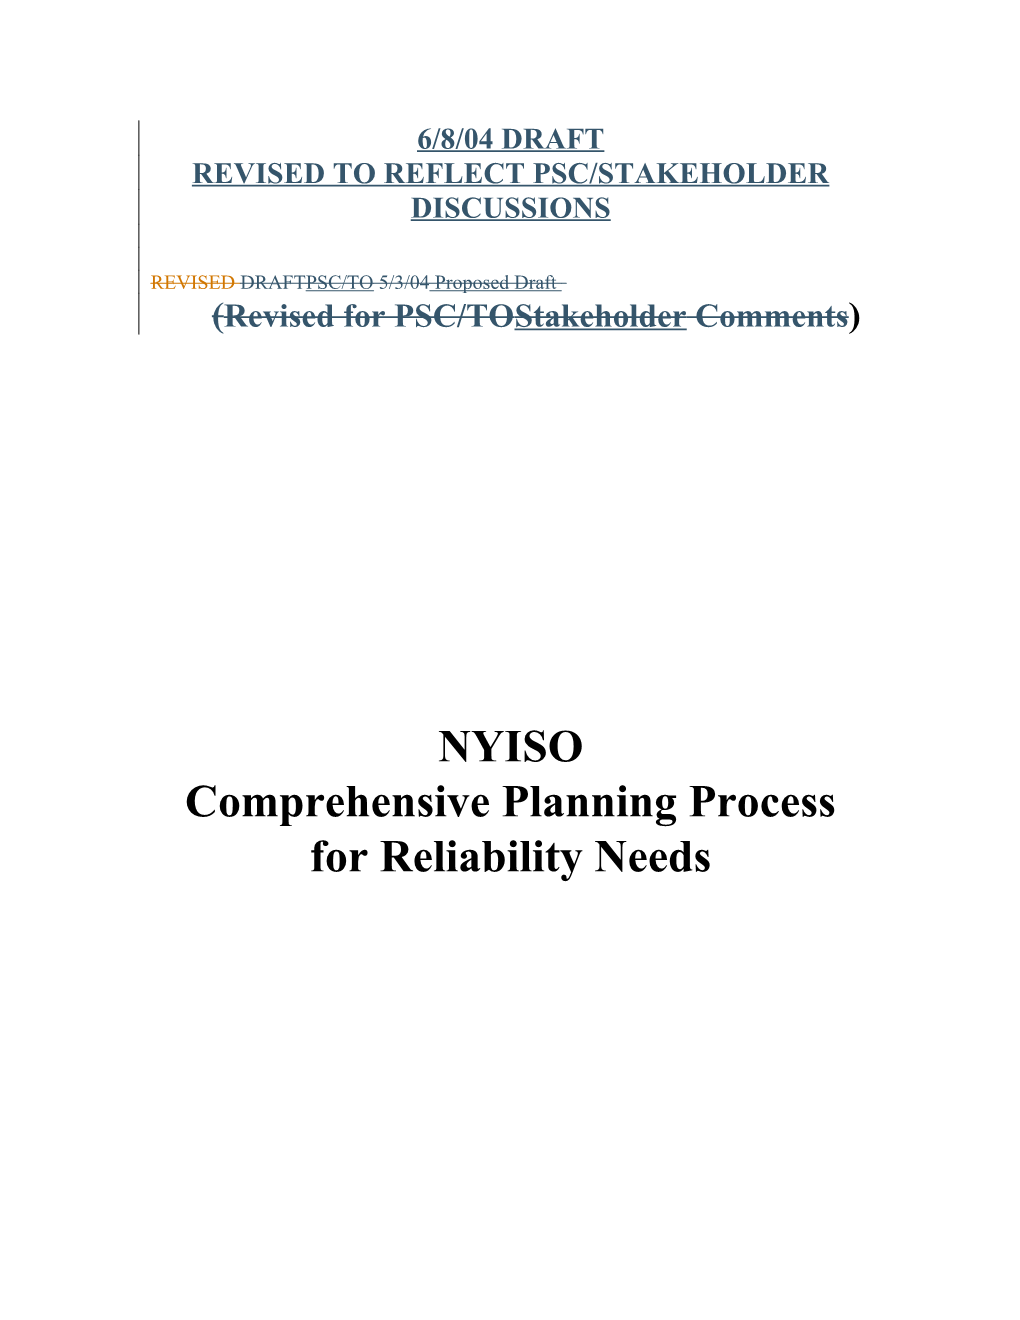 Comprehensive Reliability Planning Process